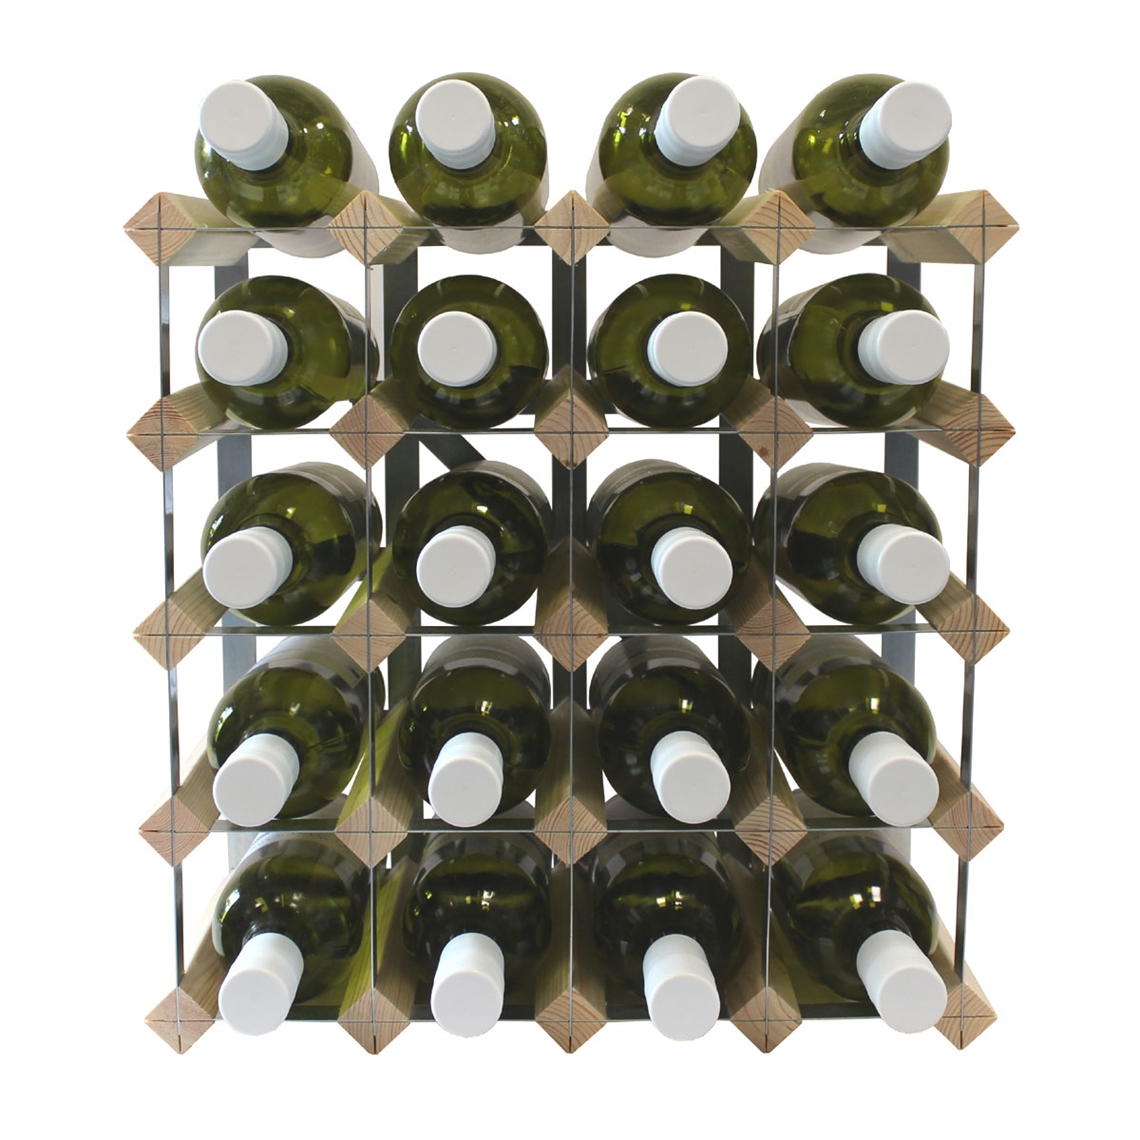 View more modularack from our Assembled Wine Racks range